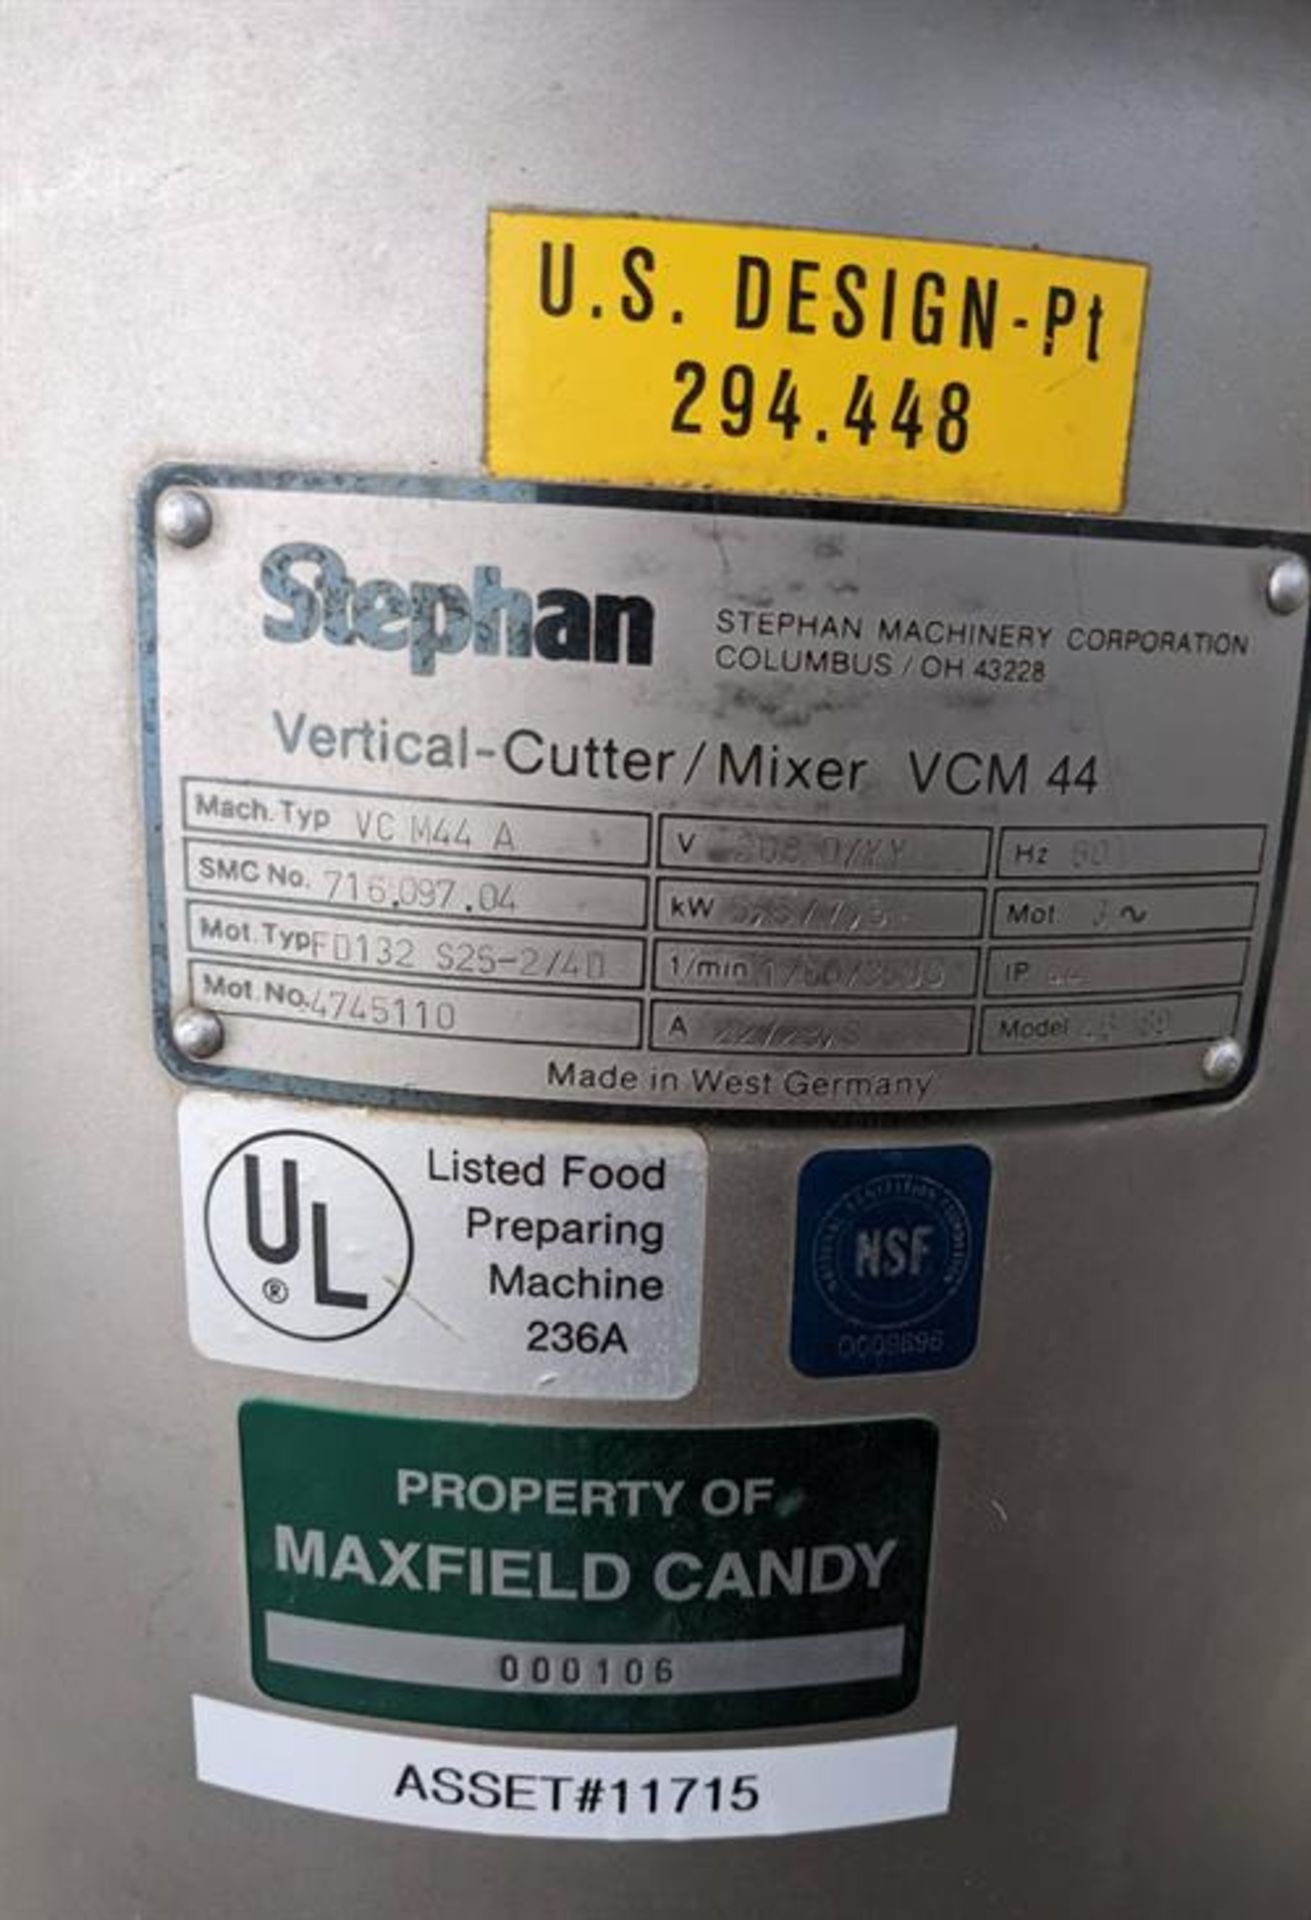 Stephan Model VCM44A Cutter Mixer - Model VCM44A - Serial number 716.097.04 - 44 liter capacity - - Image 8 of 9